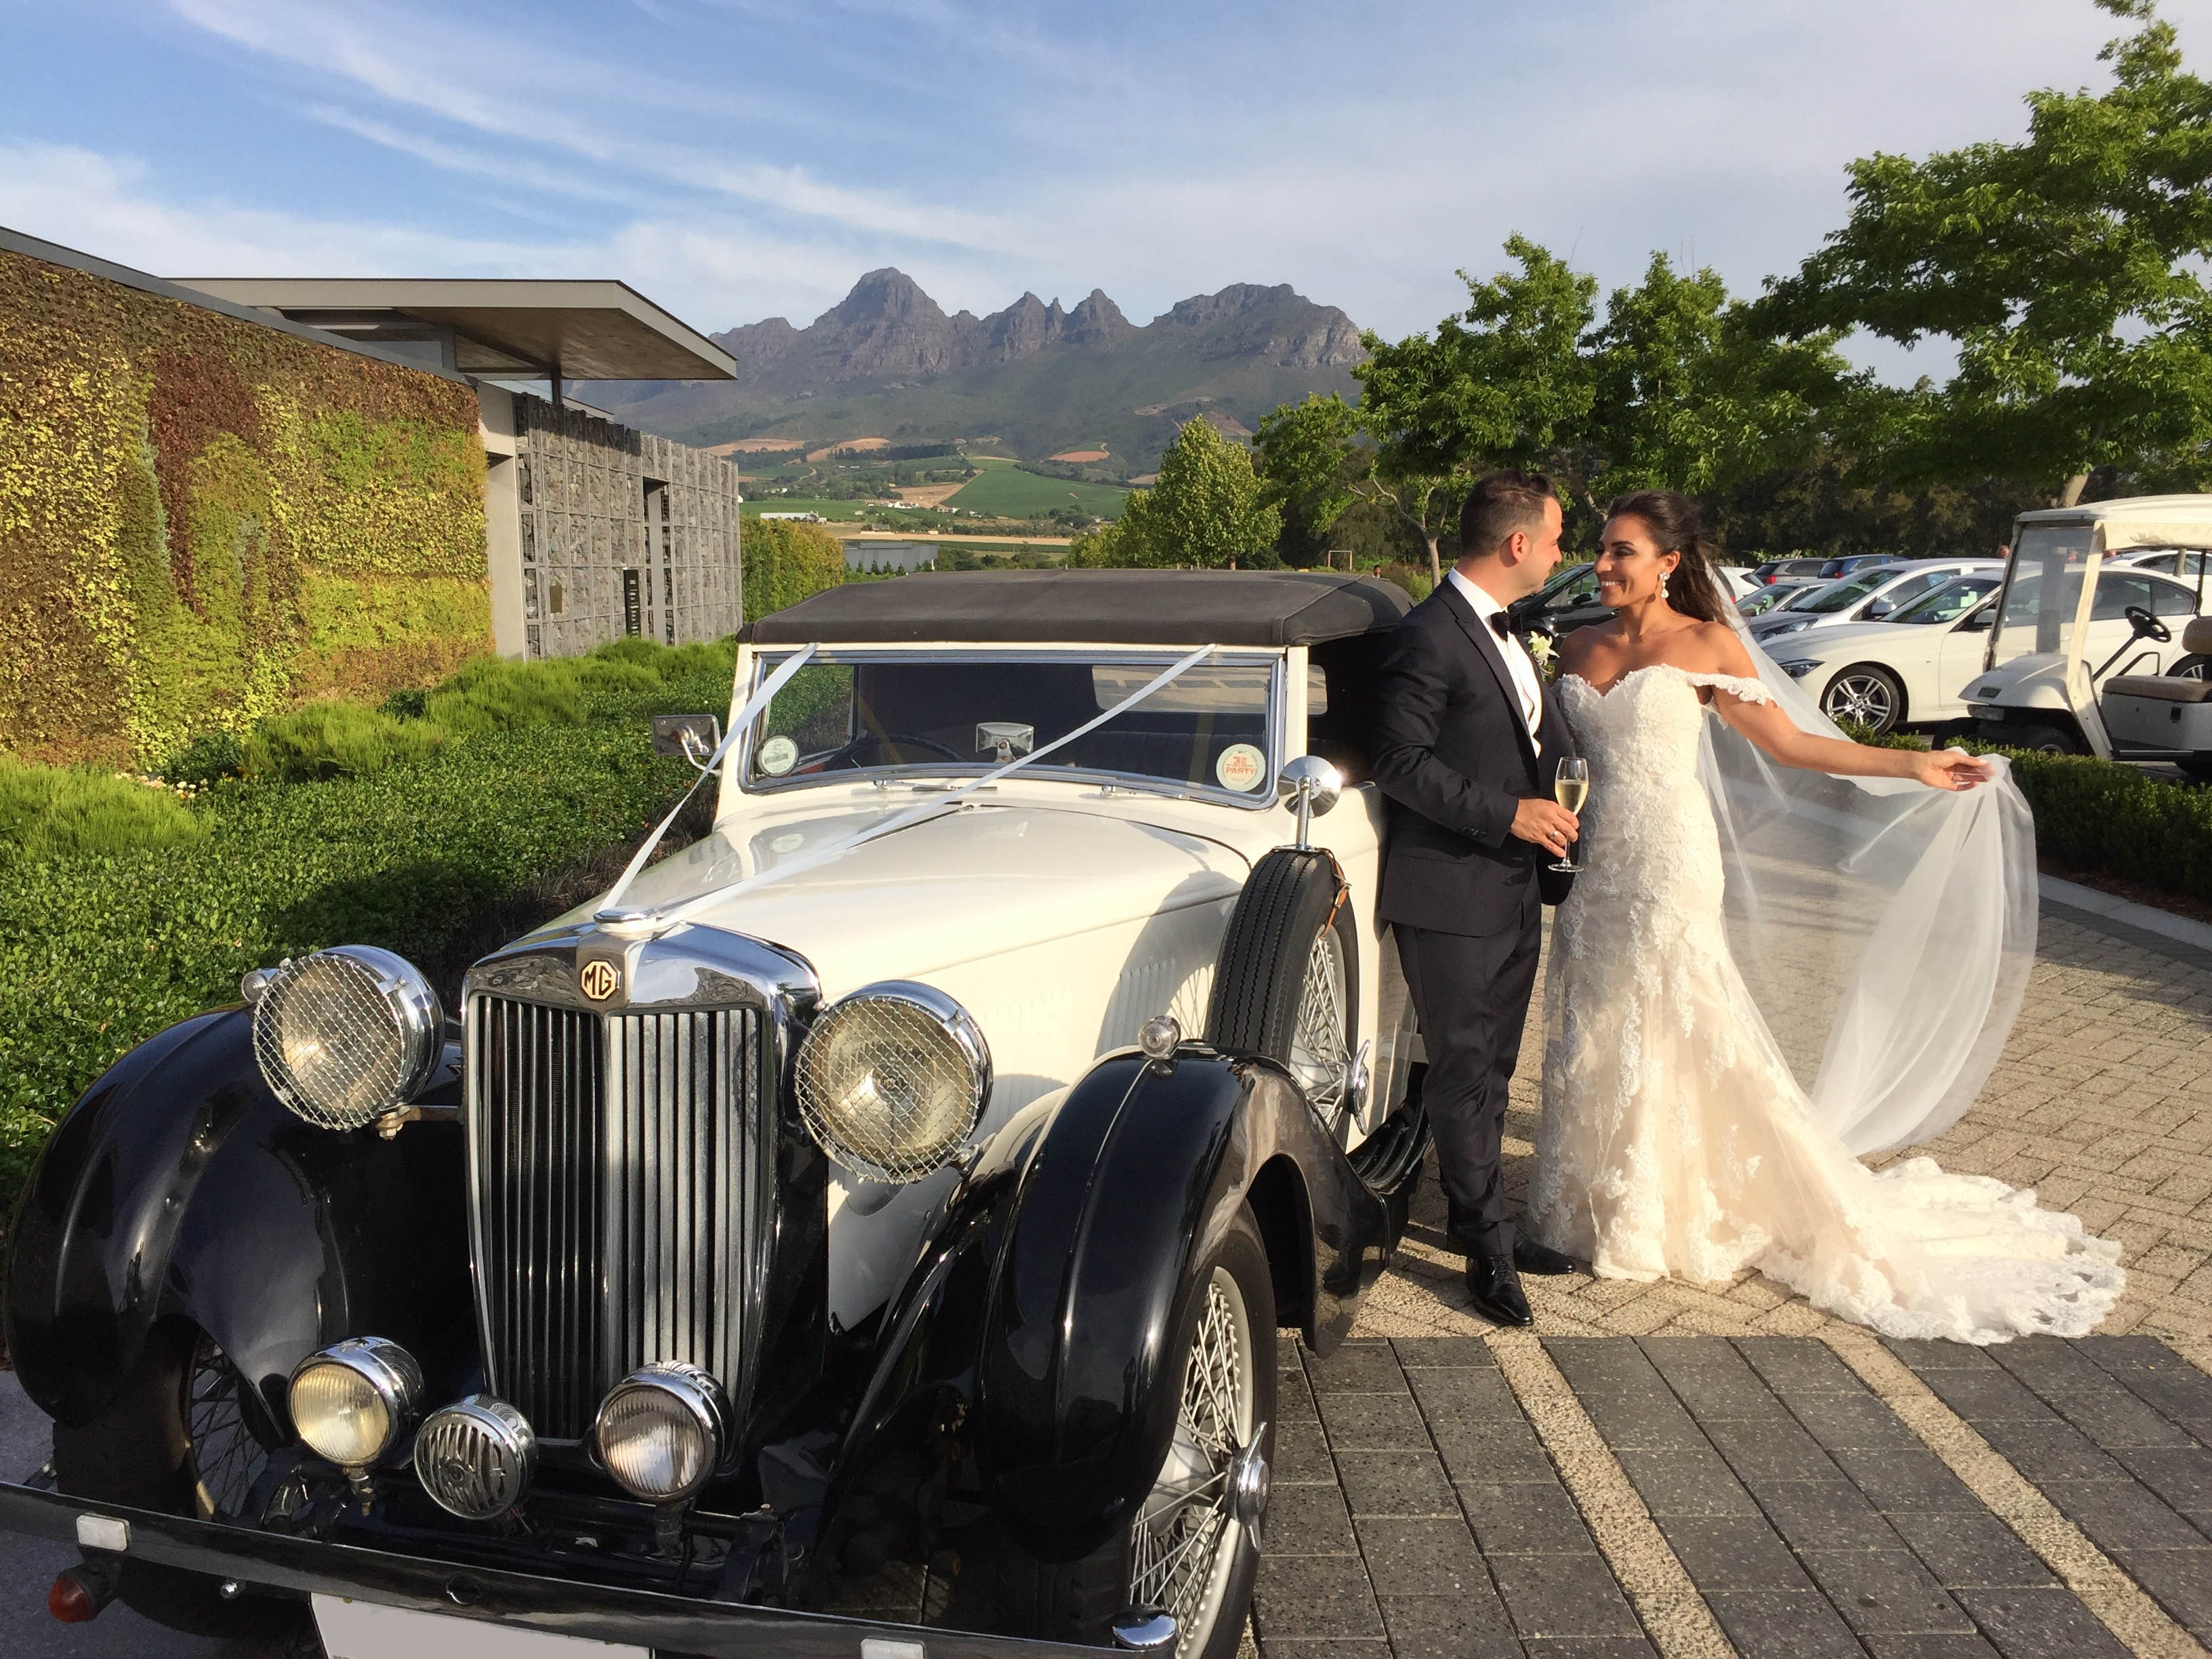 The Tickford Coupe is a truly rare and vintage wedding car